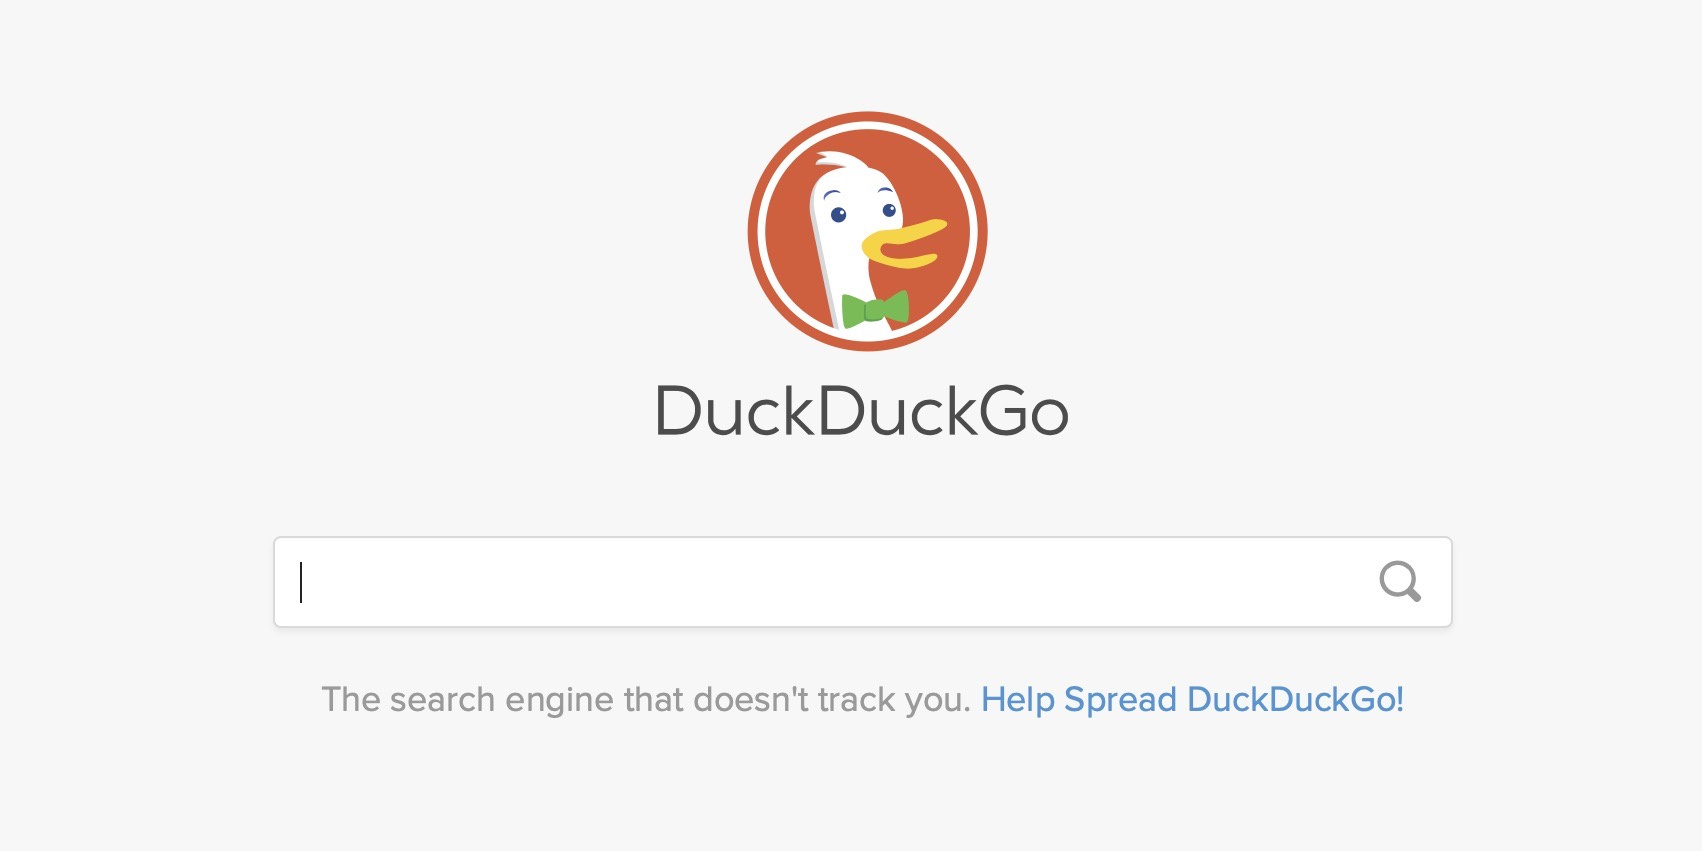 Is DuckDuckGo Safe to use